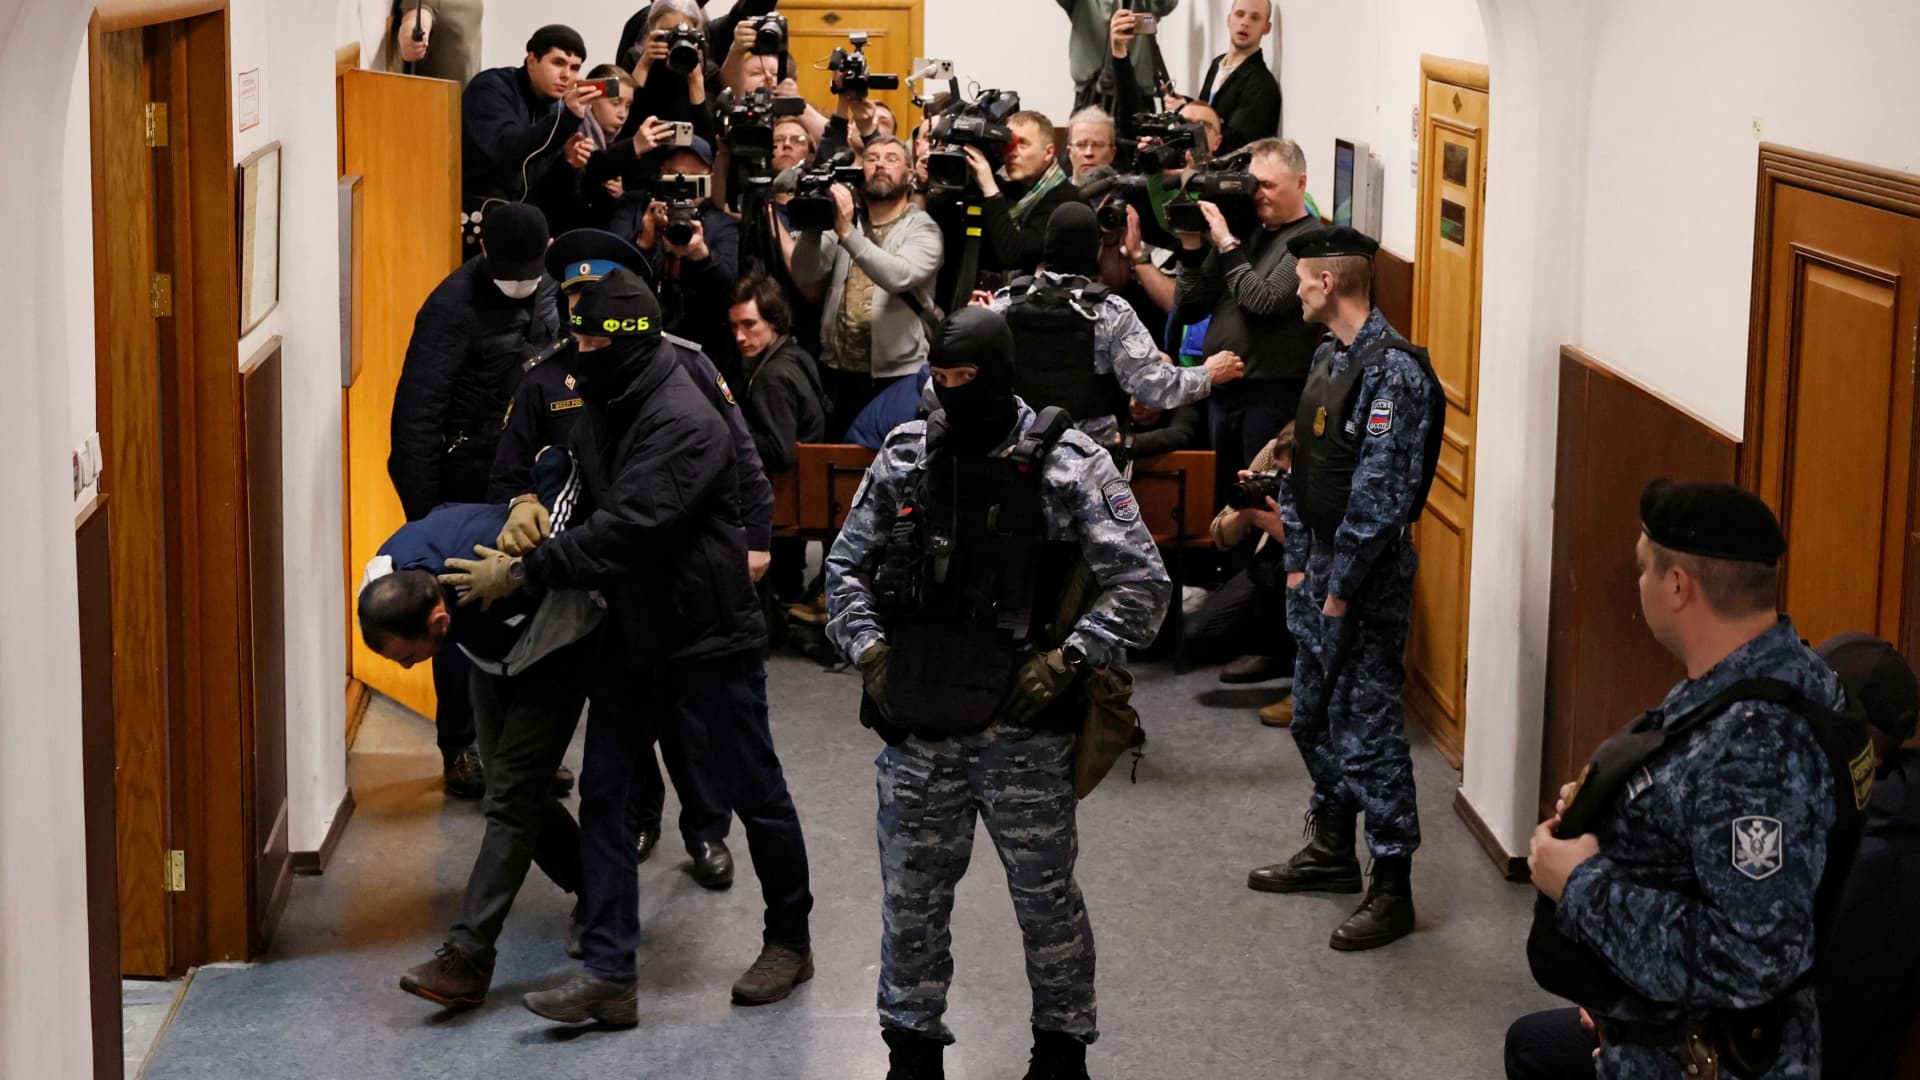 Saidakrami Murodali Rachabalizoda, a suspect in the shooting attack at the Crocus City Hall concert venue, is escorted after a court hearing at the Basmanny district court in Moscow, Russia March 24, 2024. 